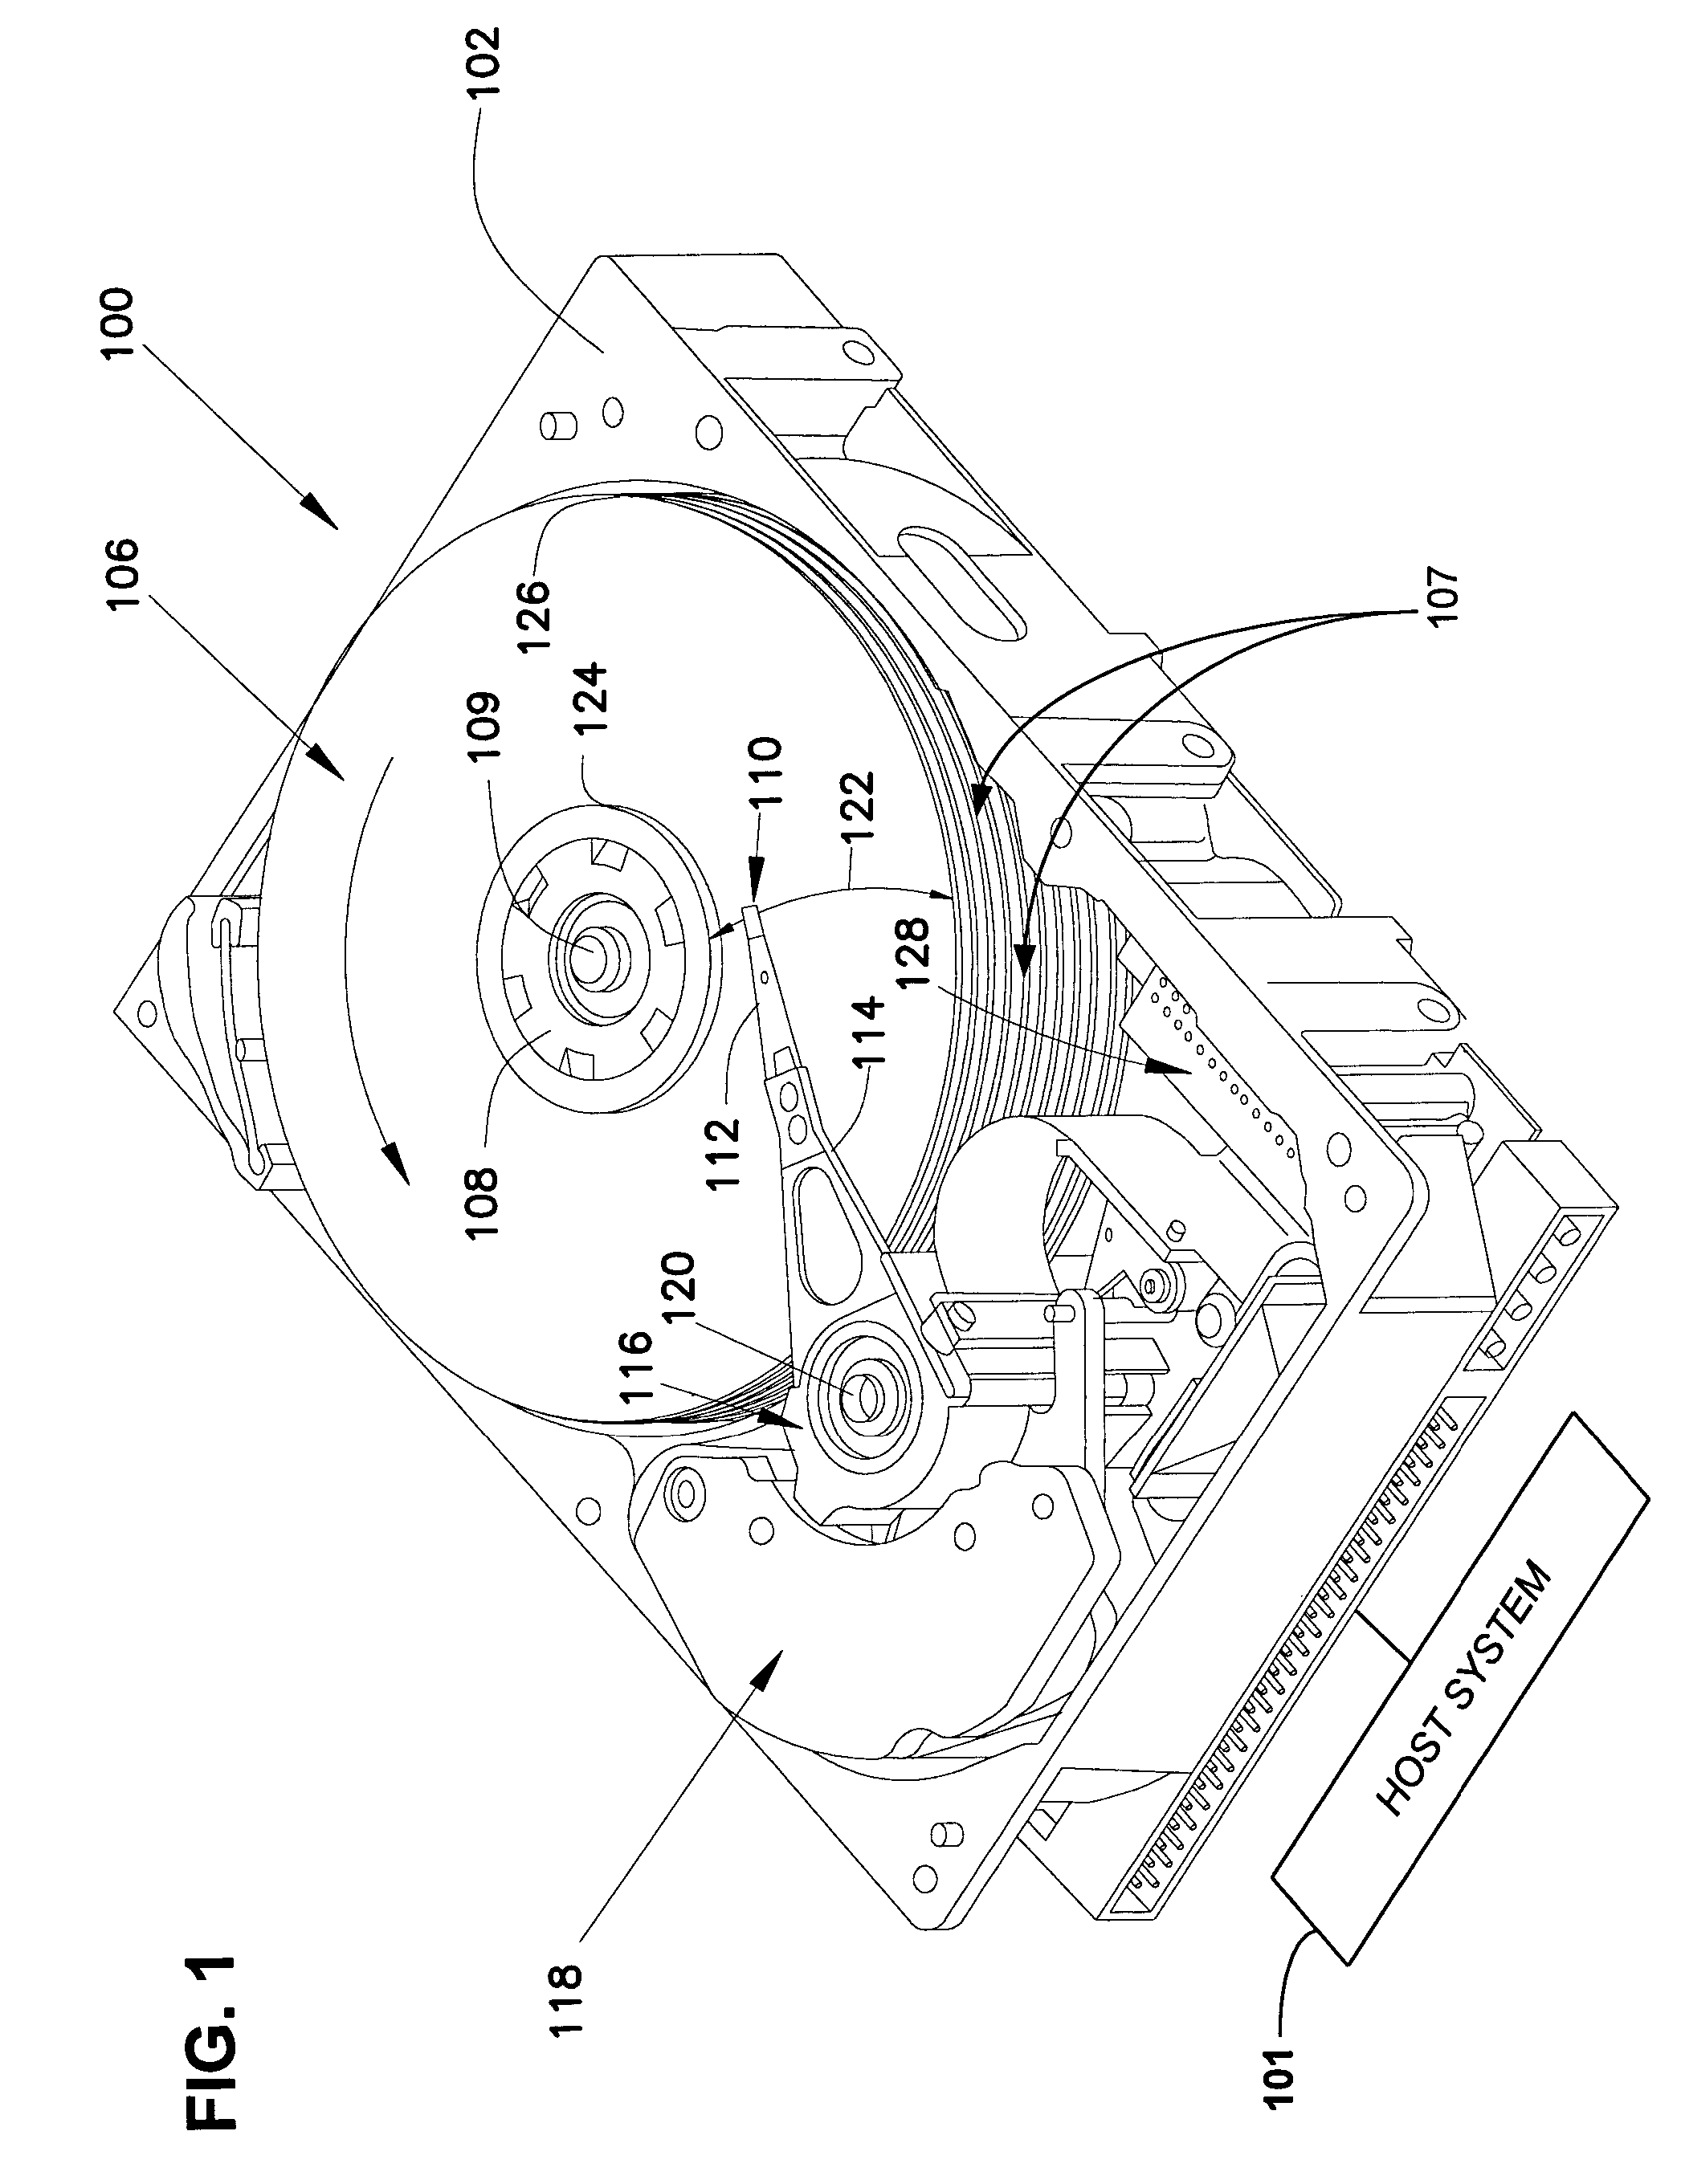 Retrial and reread methods and apparatus for recording channels